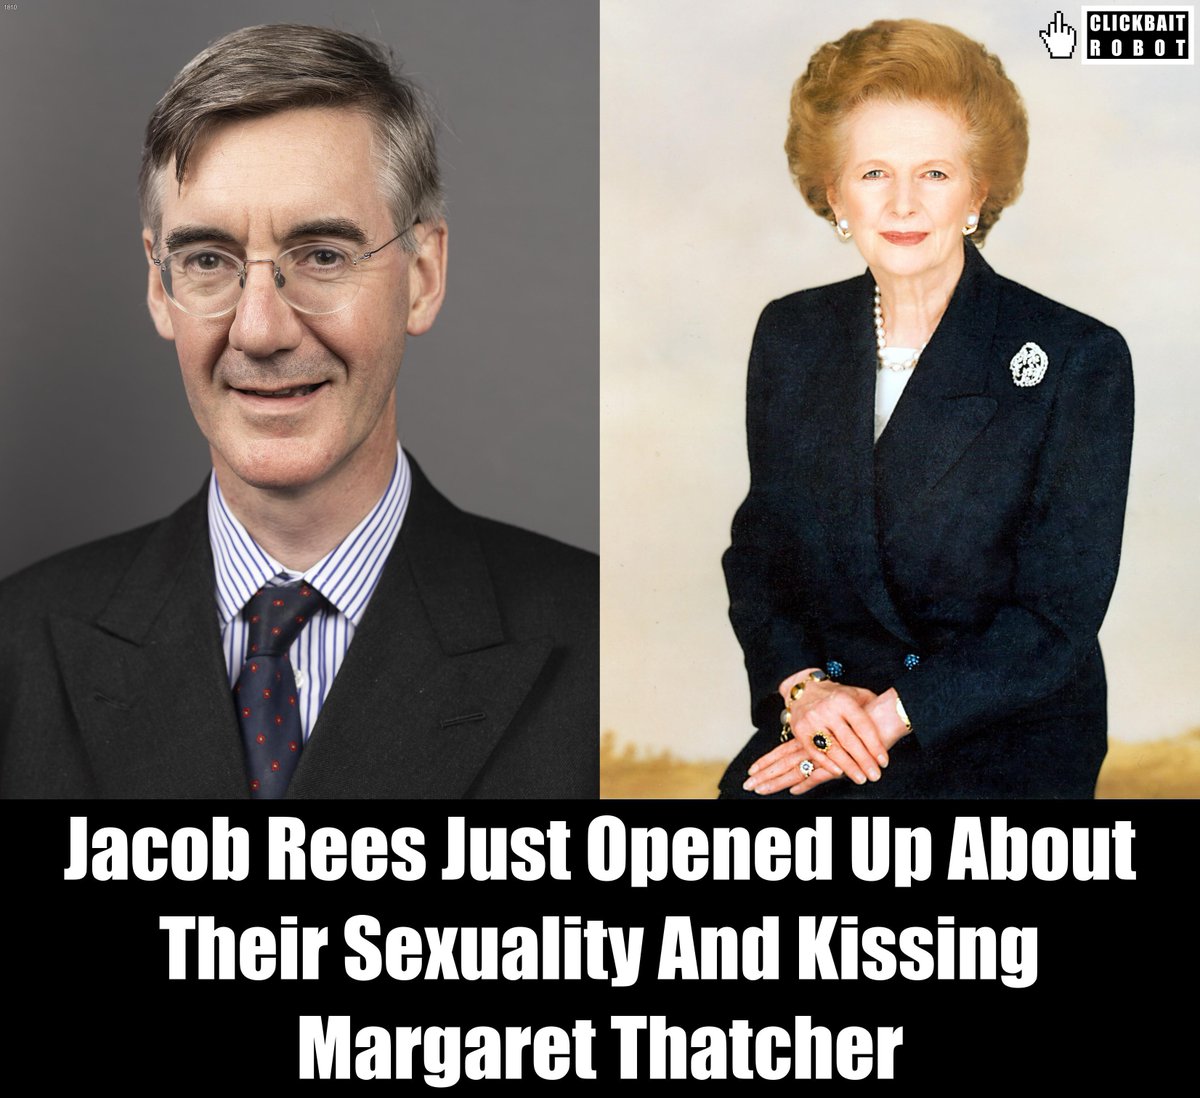 Jacob Rees Just Opened Up About Their Sexuality And Kissing Margaret Thatcher #JacobRees